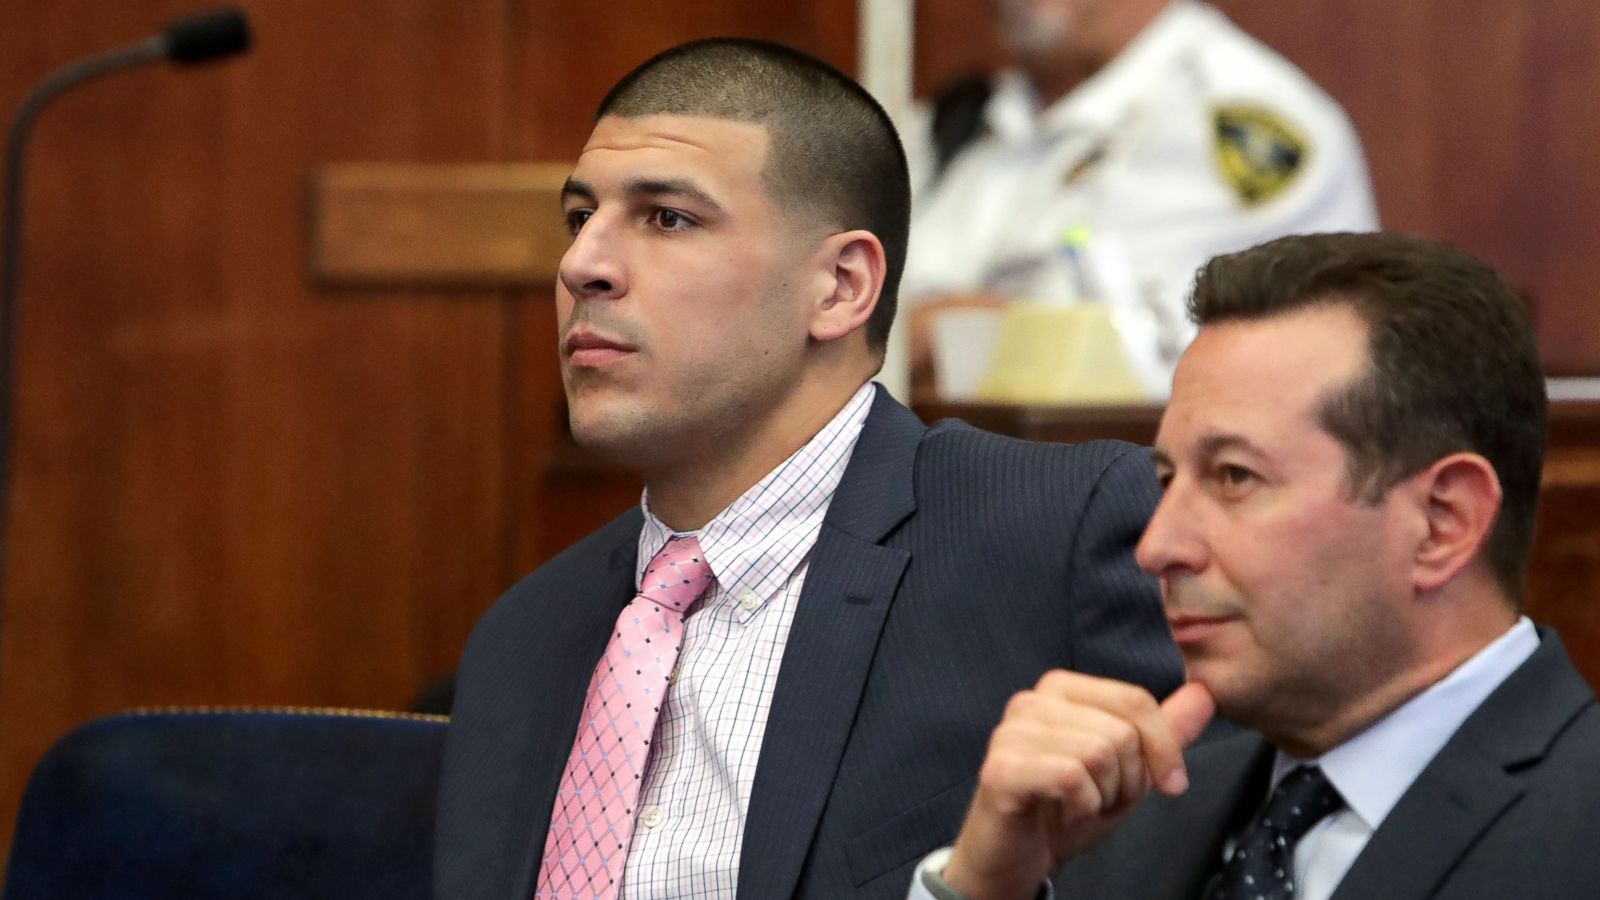 What we know about Aaron Hernandez's life in prison - ABC News